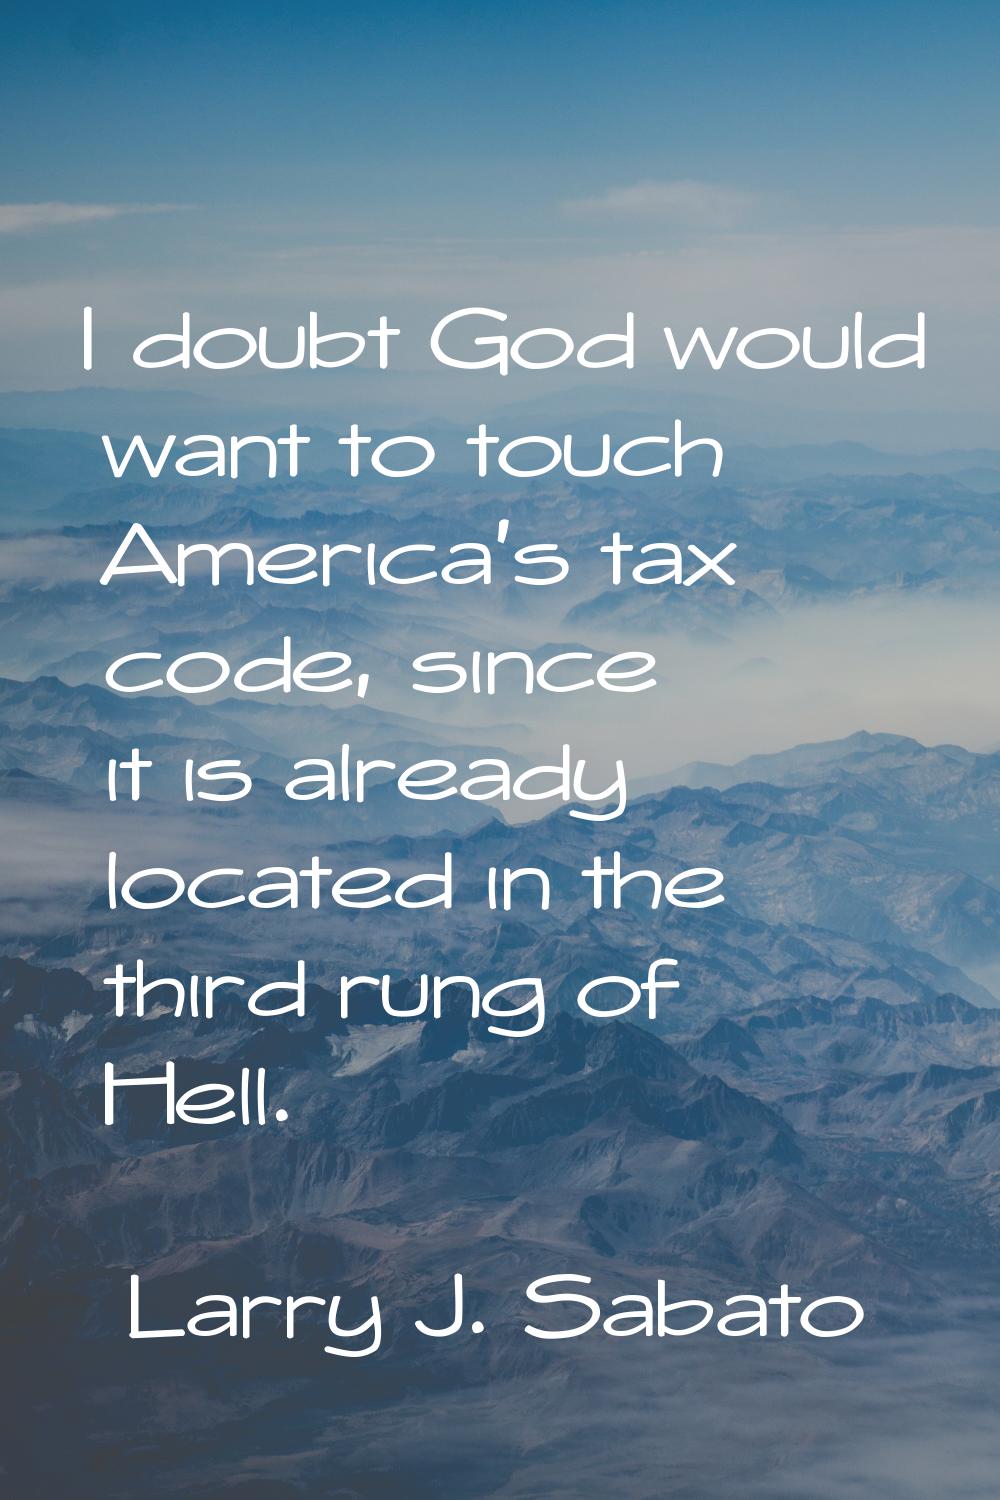 I doubt God would want to touch America's tax code, since it is already located in the third rung o